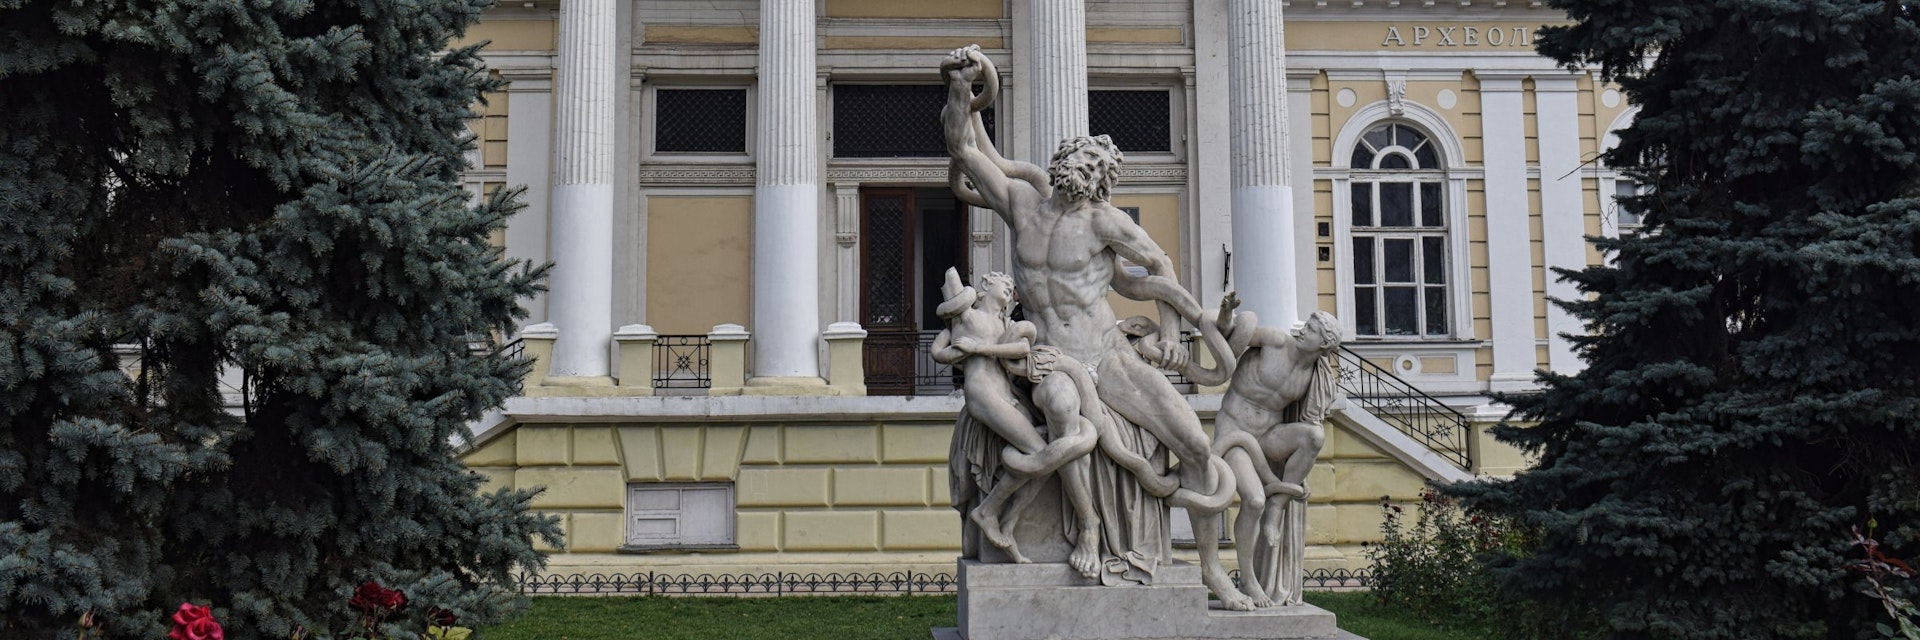 The neoclassical edifice of Odesa's Archaeology Museum